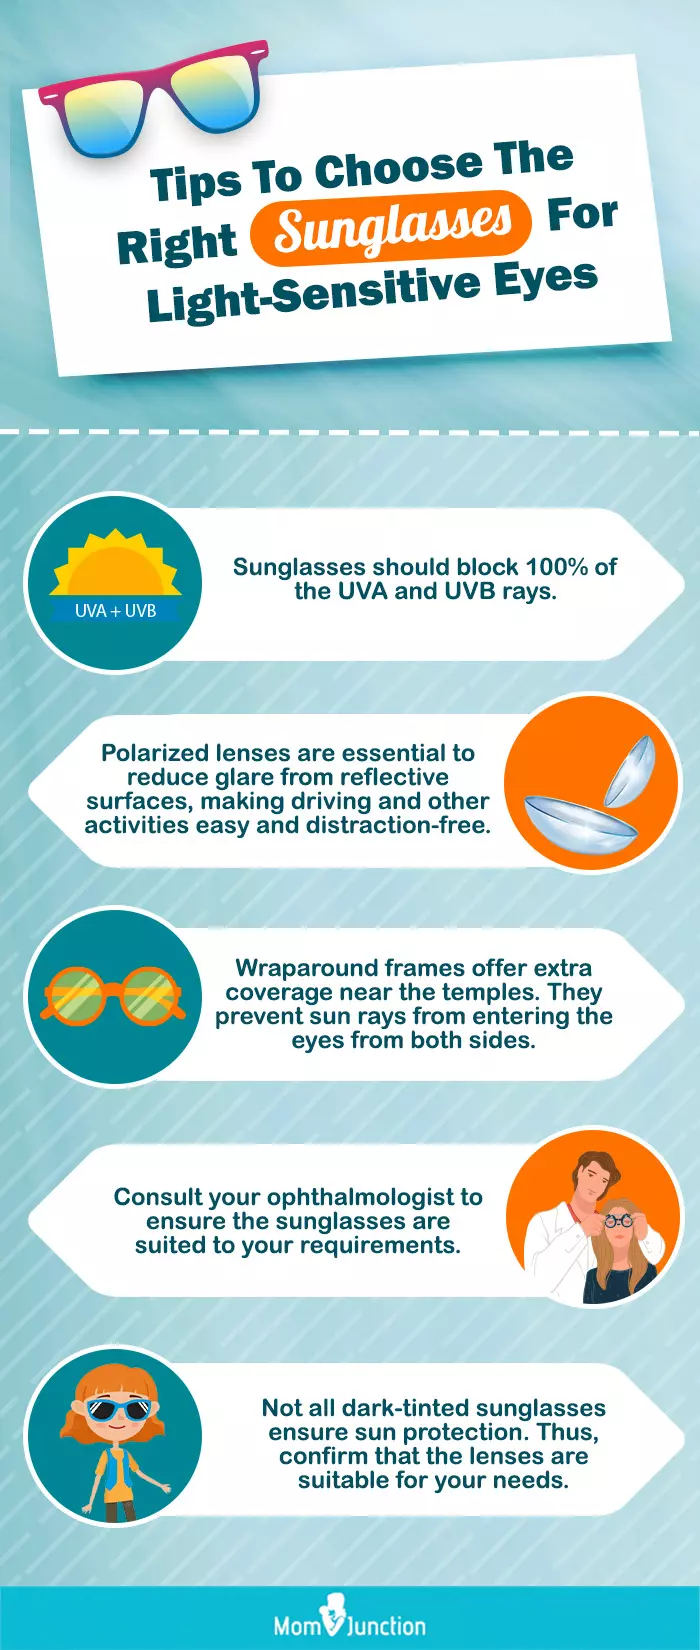 Tips To Choose The Right Sunglasses For Light-Sensitive Eyes